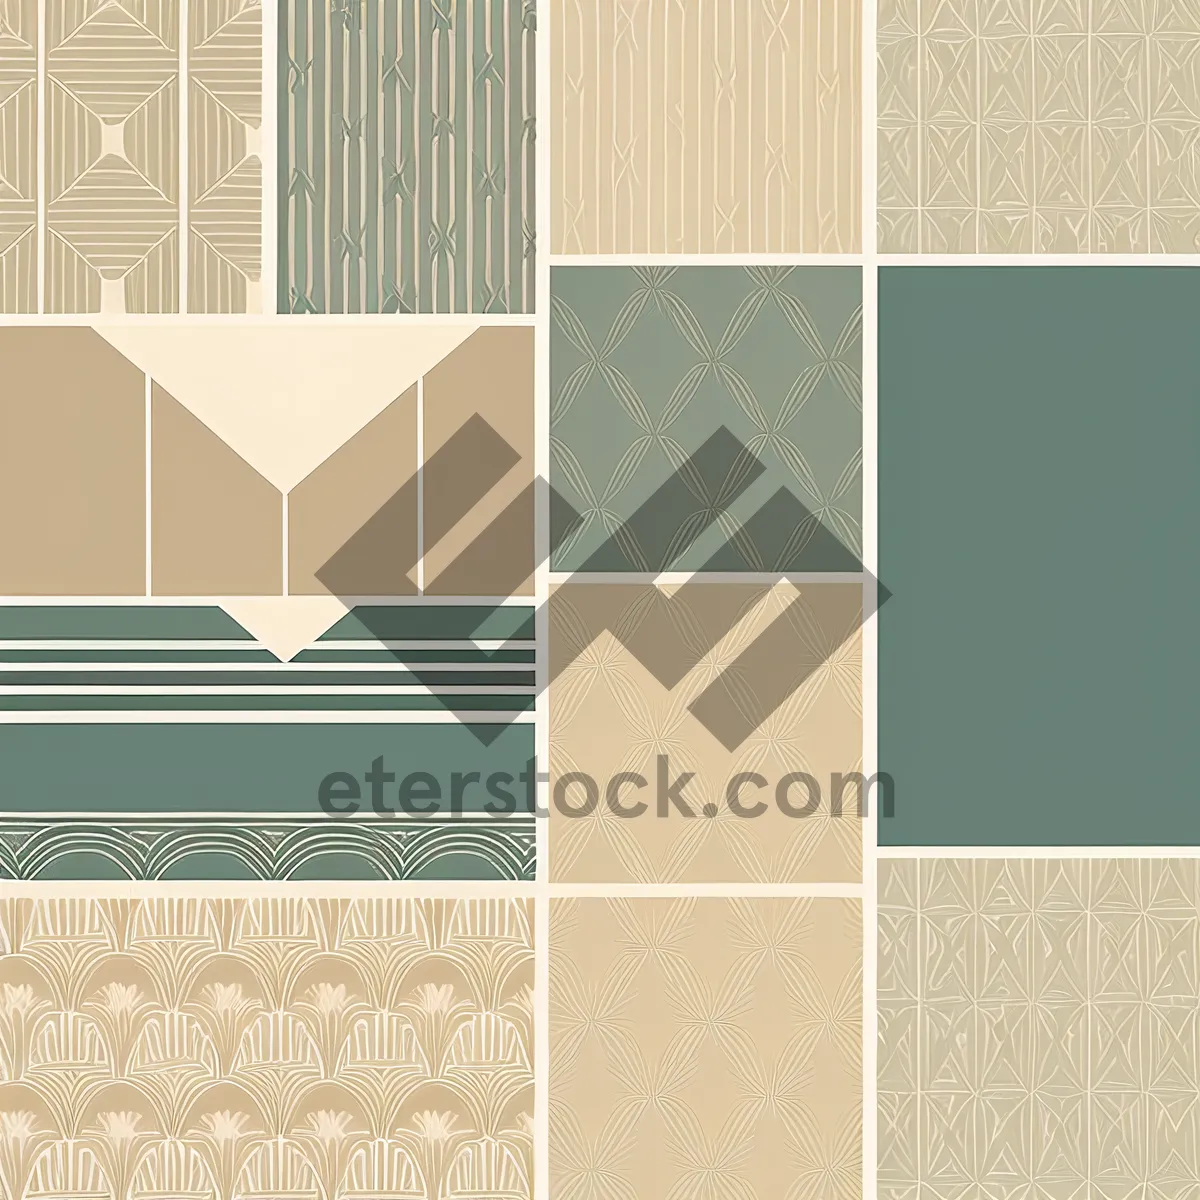 Picture of Vintage Mosaic Paper Design Graphic